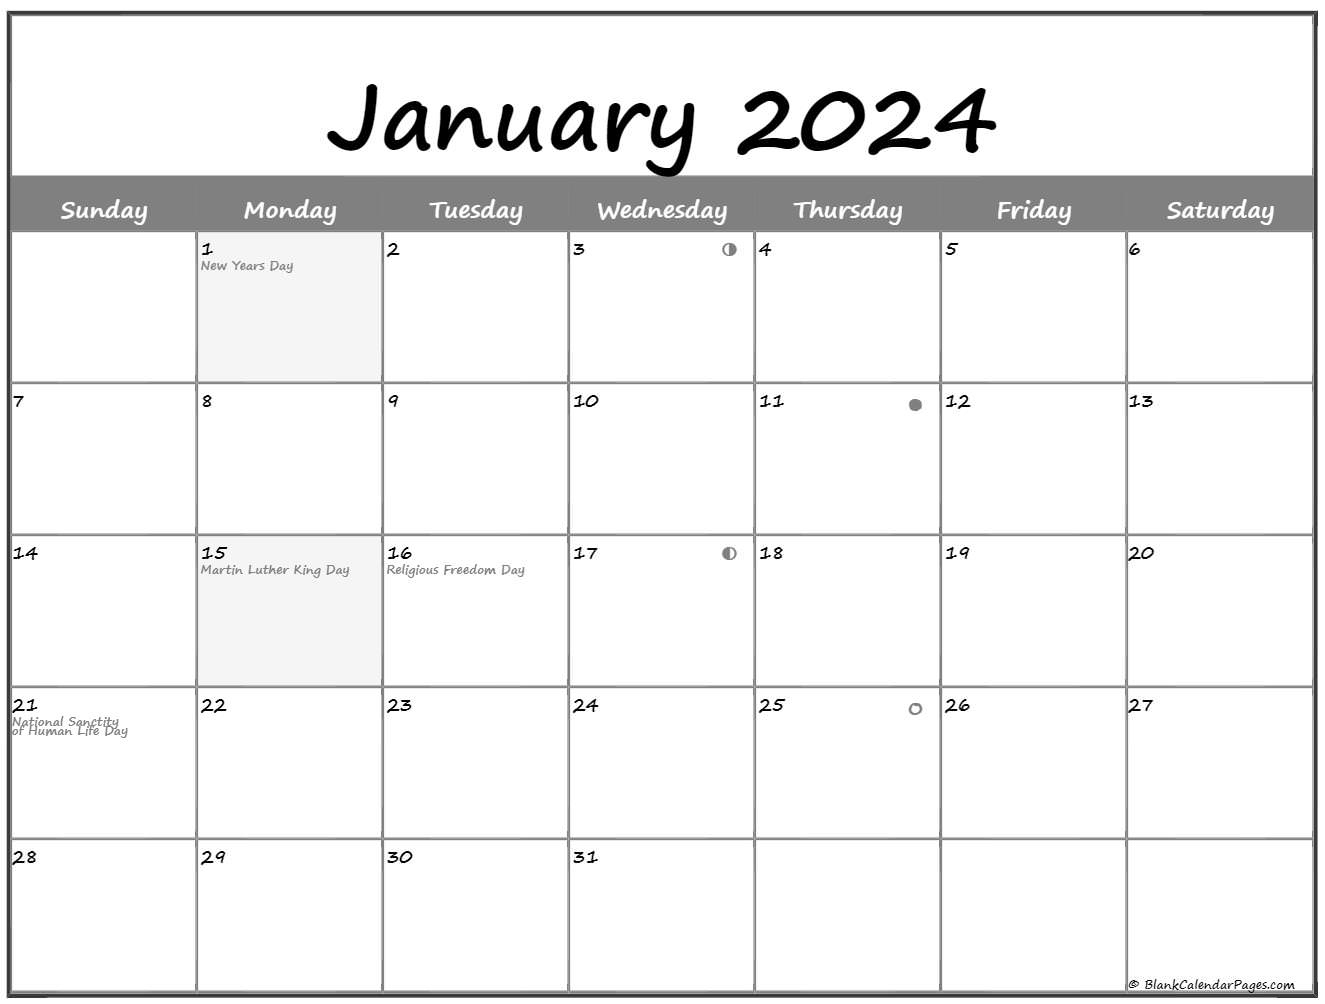 January 2024 Lunar Calendar Moon Phase Calendar - Free Printable 2024 Monthly Calendar With Holidays And Moon Phases